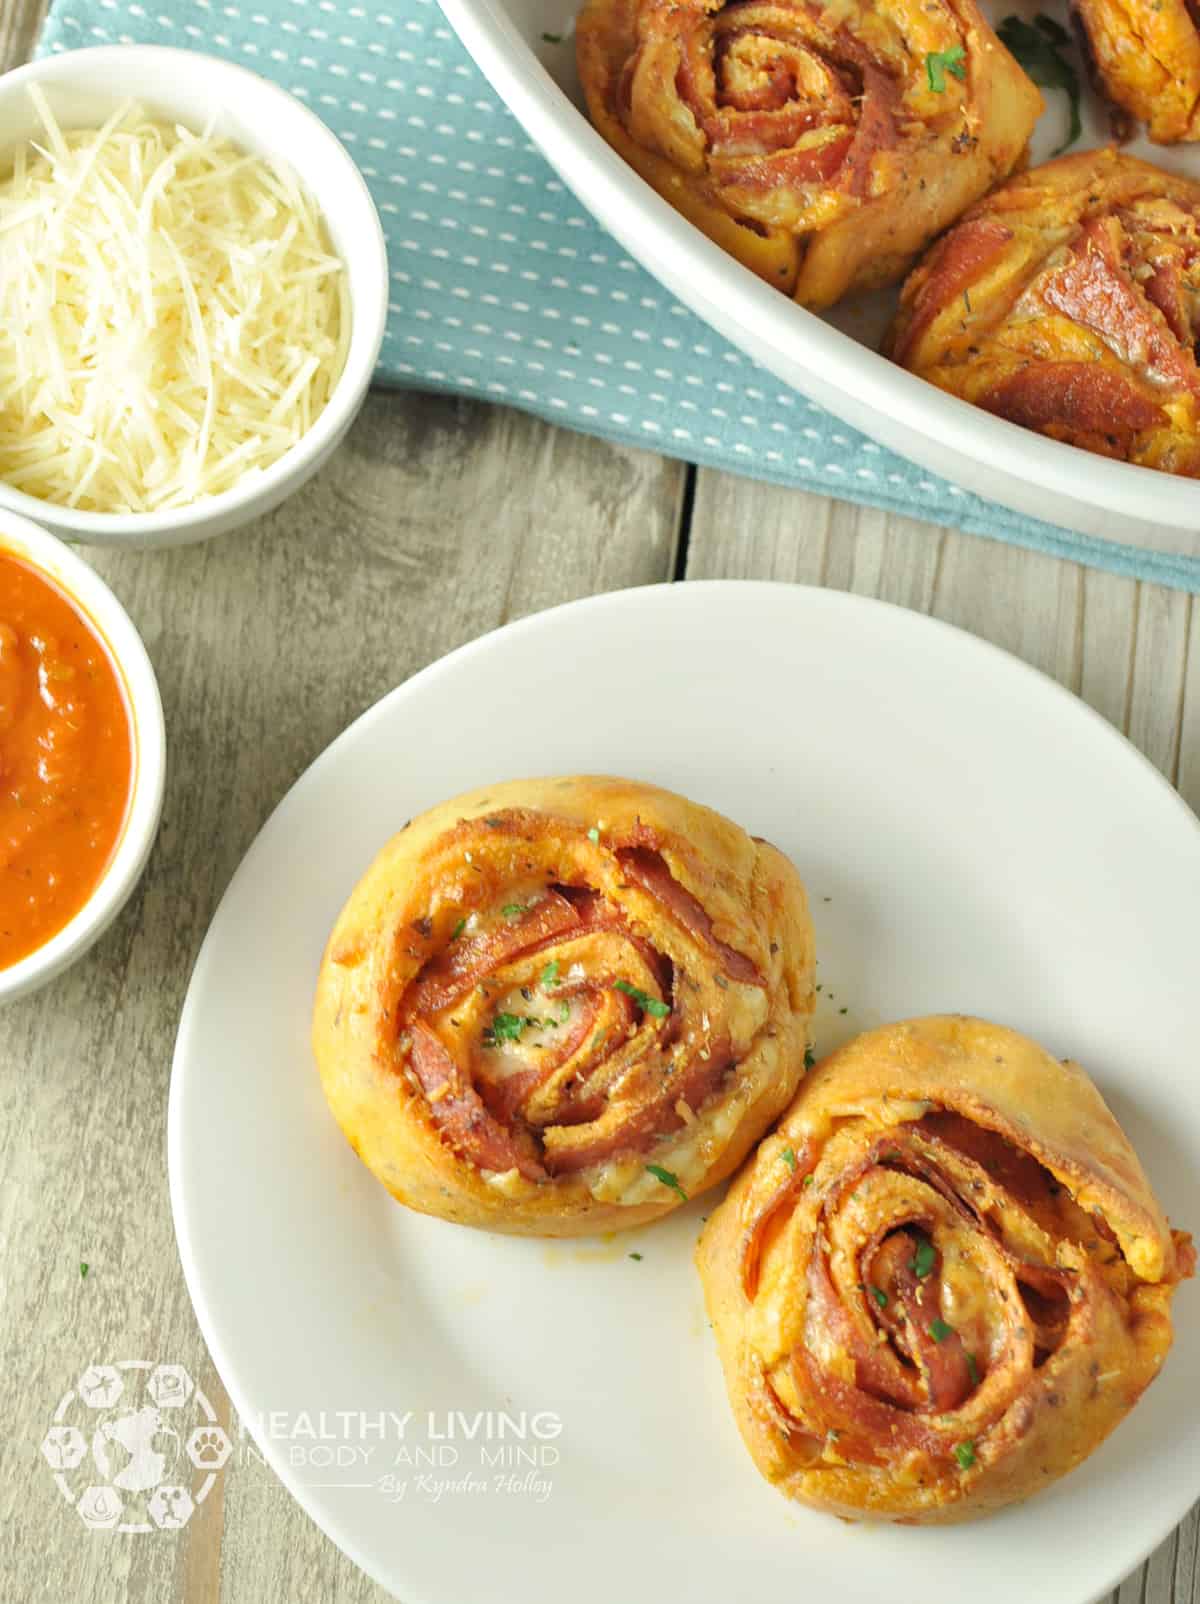 Two pepperoni pizza pinwheels sit on a white plate on a gray wooden table. To the left is a white round sauce dish filled with pizza sauce, and another above it with shredded cheese. In the upper right corner is a bowl of more pepperoni pizza pinwheels.